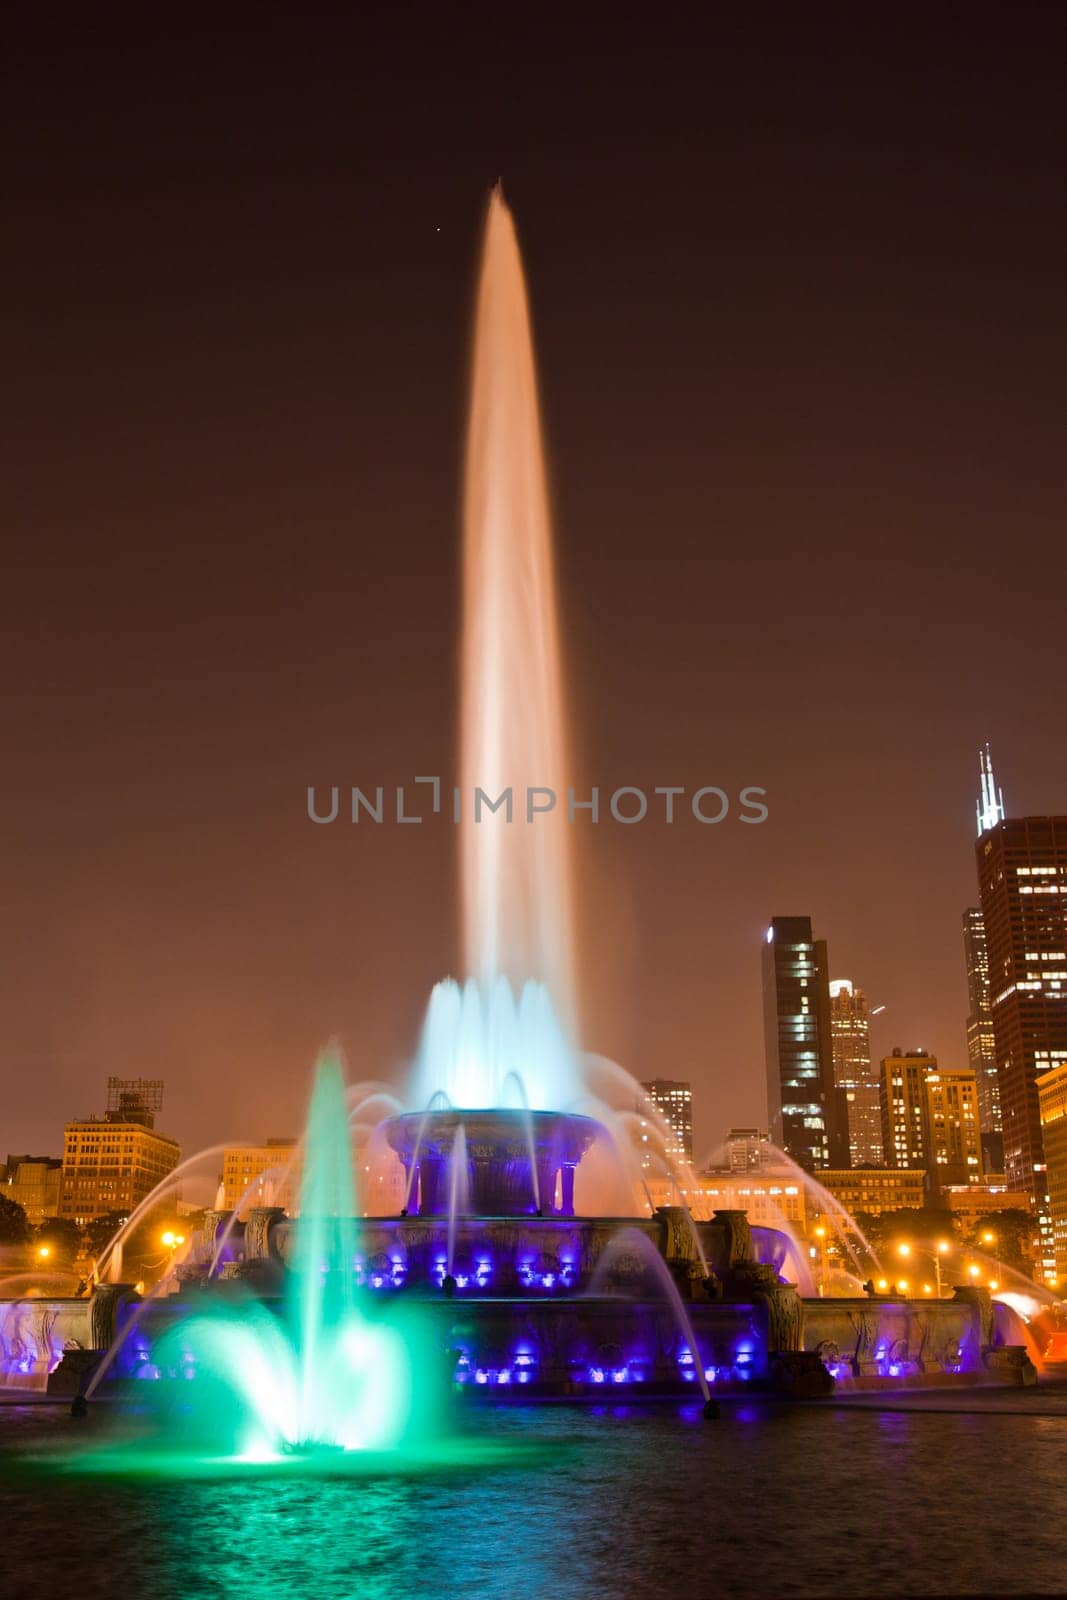 Colorful Cityscape: Vibrant illuminated fountain stands tall amidst Chicagos urban skyline at night, creating a captivating display of water jets and dancing lights.